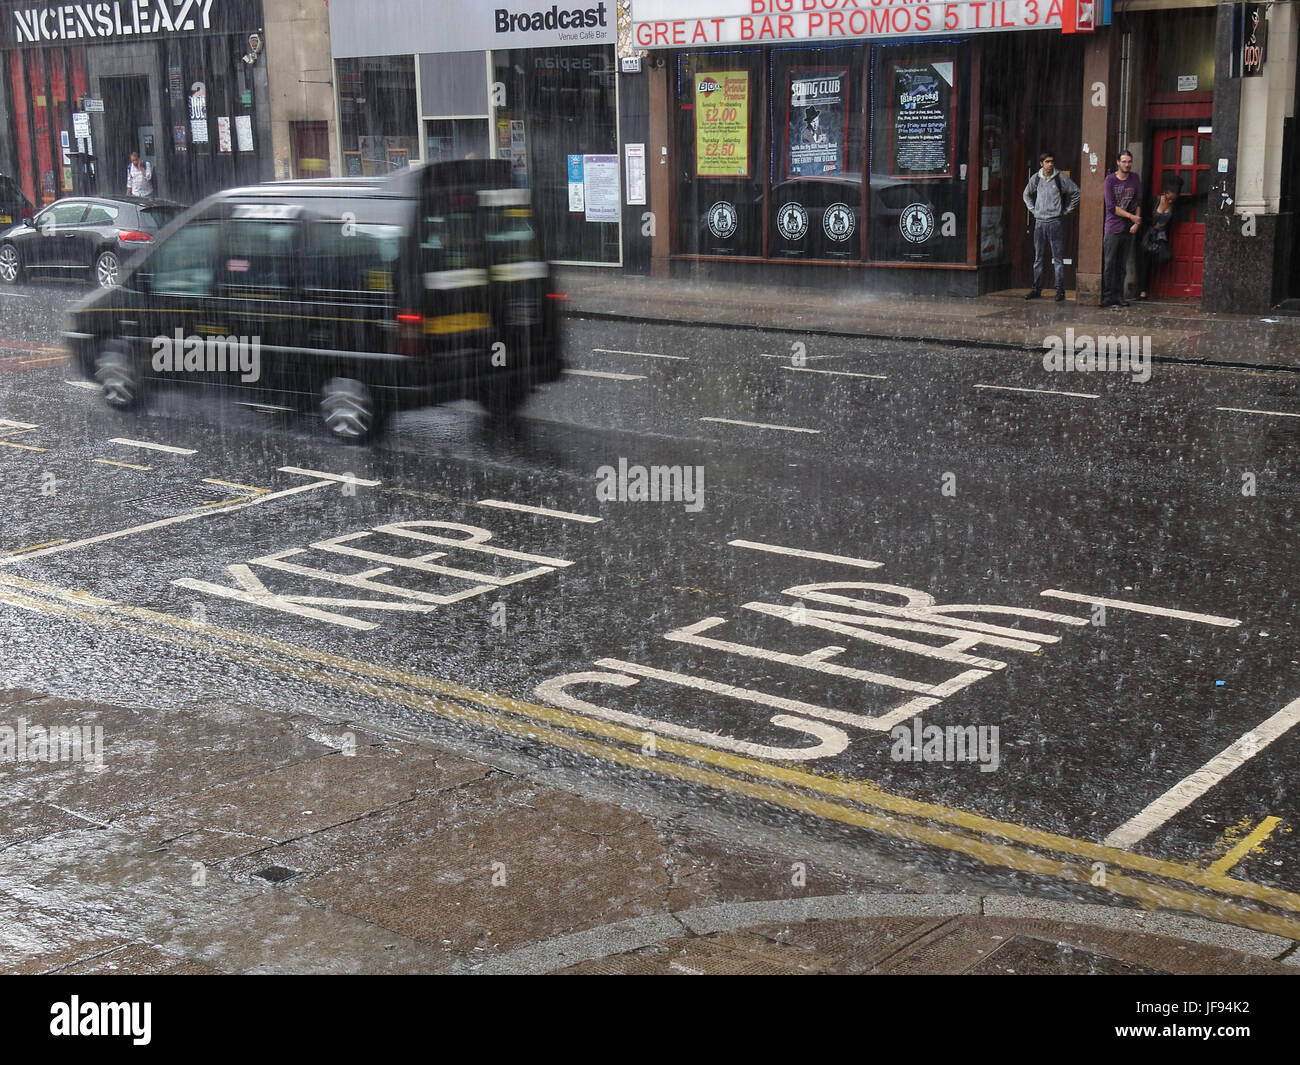 heavy rain torrential on the road affecting traffic on Glasgow street keep clear Nice N Sleazy Stock Photo